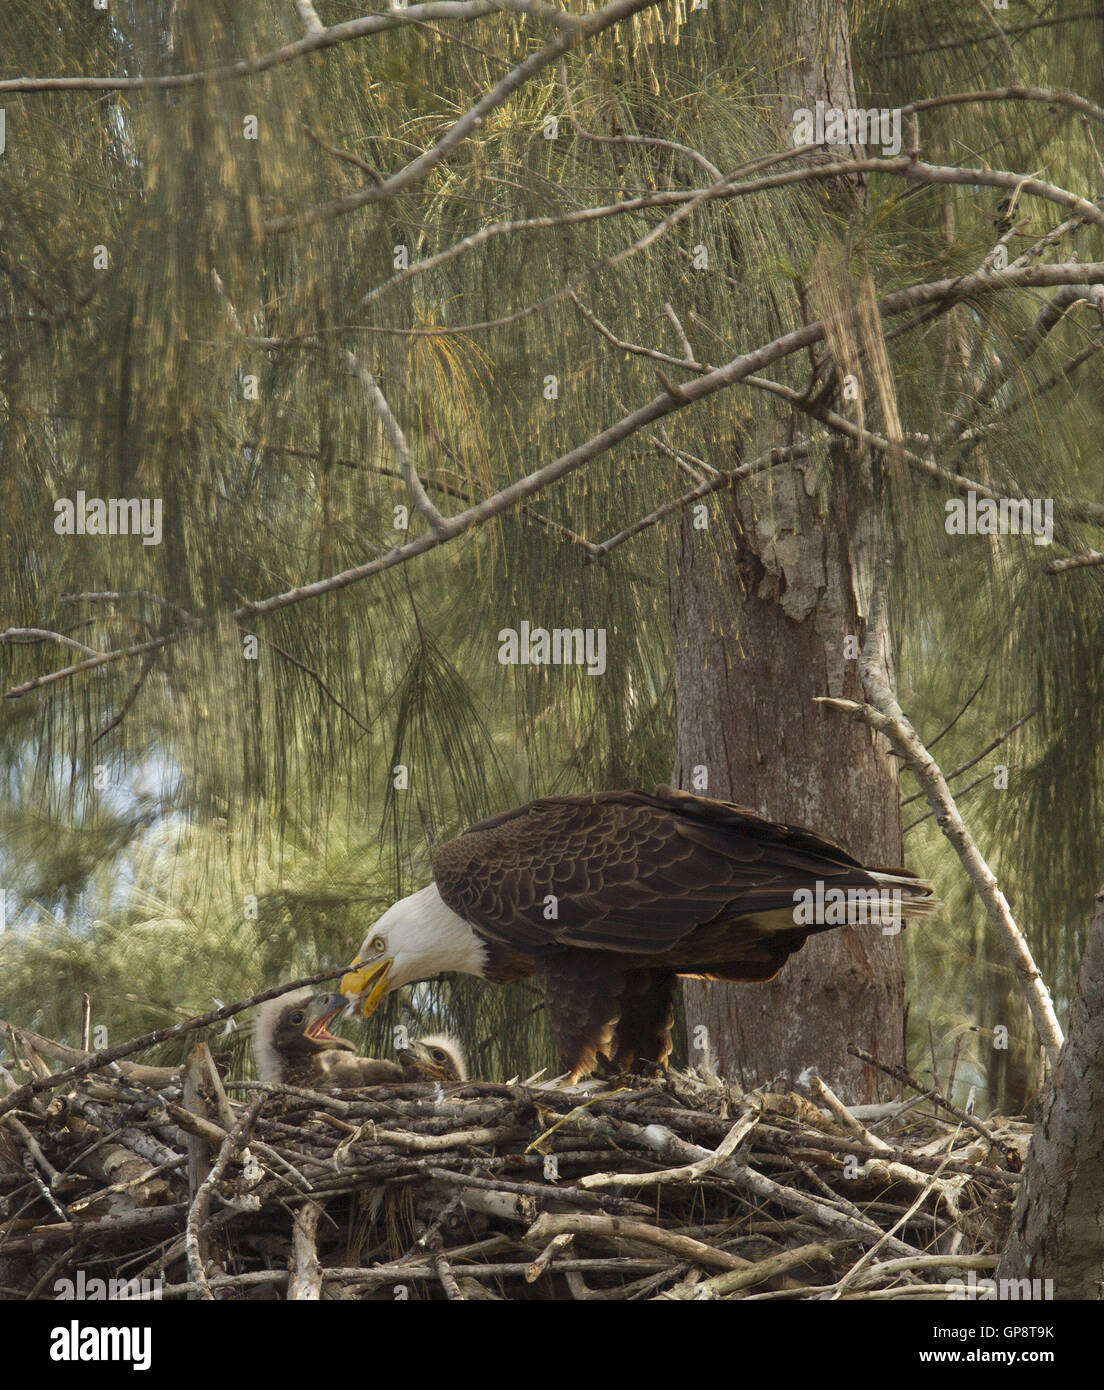 Pembroke Pines, Florida, USA. . A mature eagle feeds the young chicks in their Pembroke Pines, Florida nest. The eagles were born in mid January. The adult eagles have lived in their nest since 2008. © J Pat Carter/ZUMA Wire/Alamy Live News Stock Photo